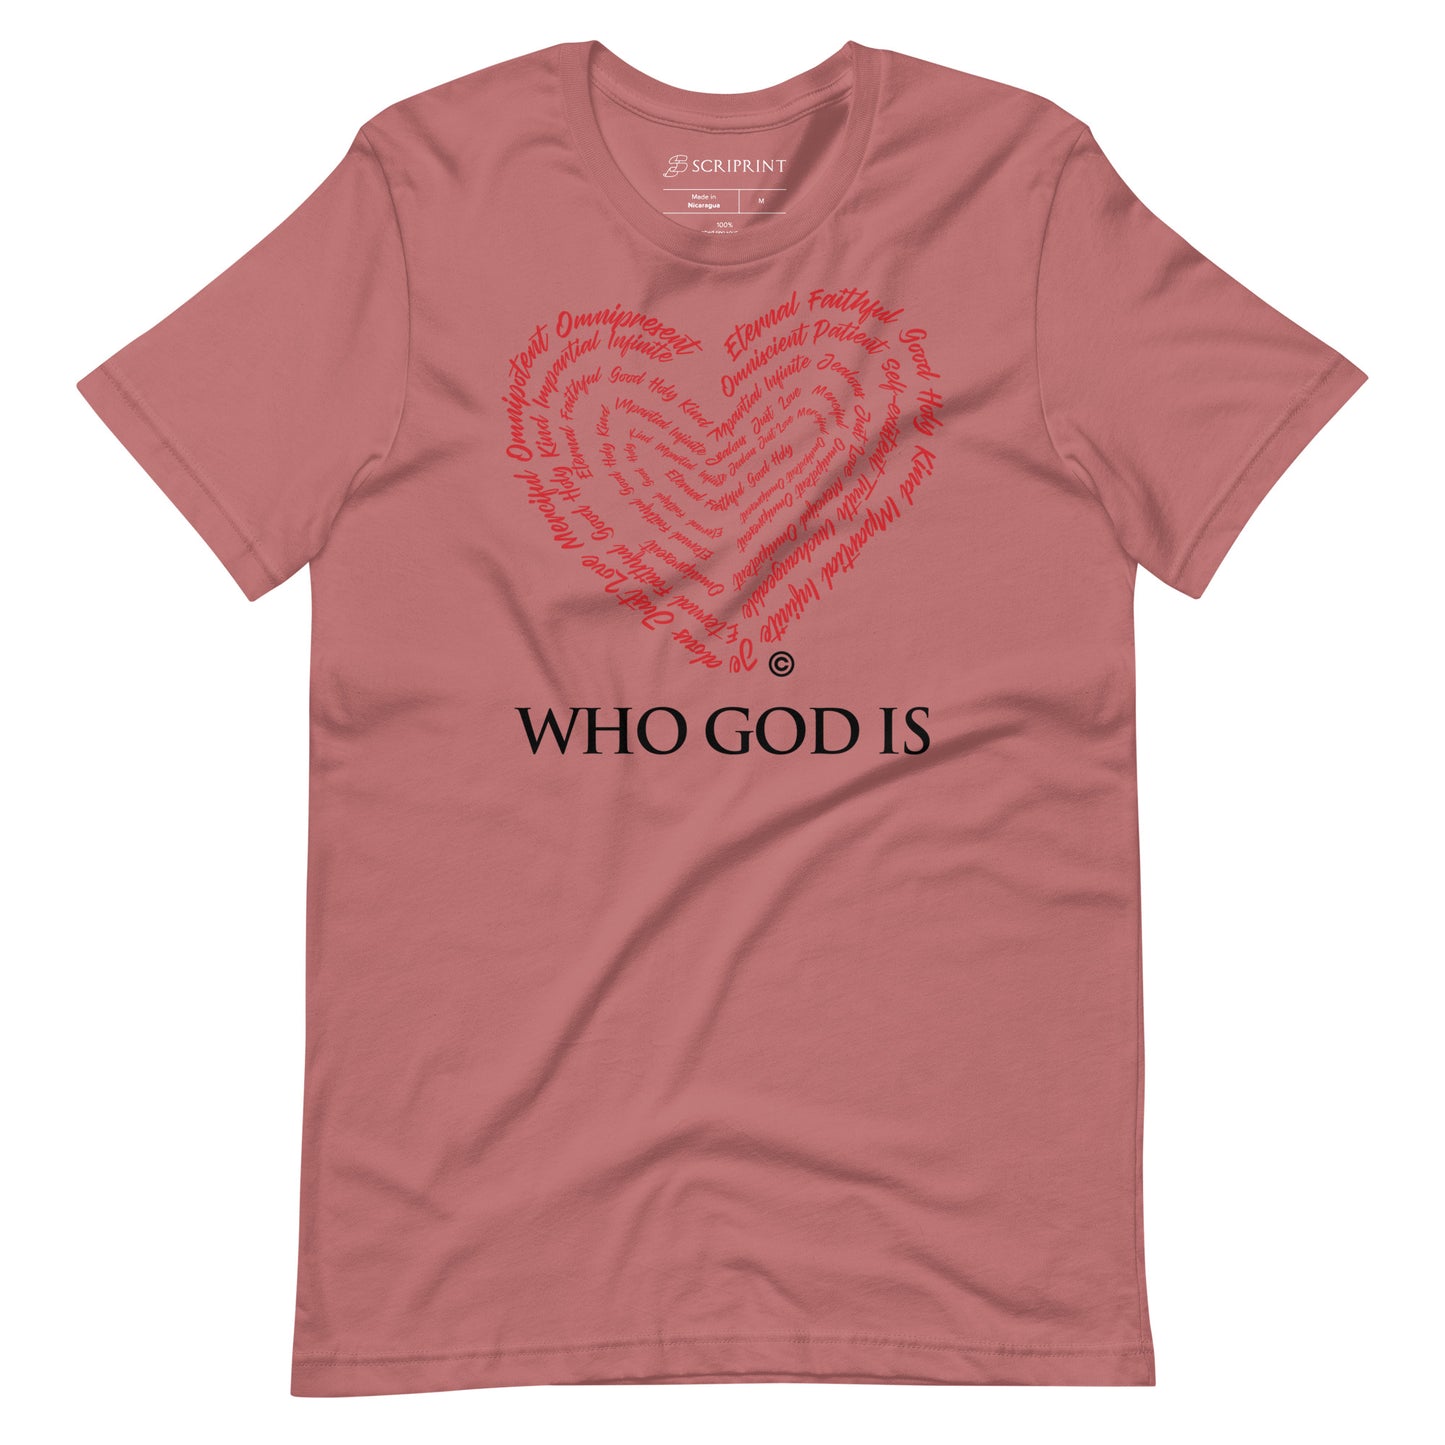 Who God Is Dark-Colored Unisex T-Shirt